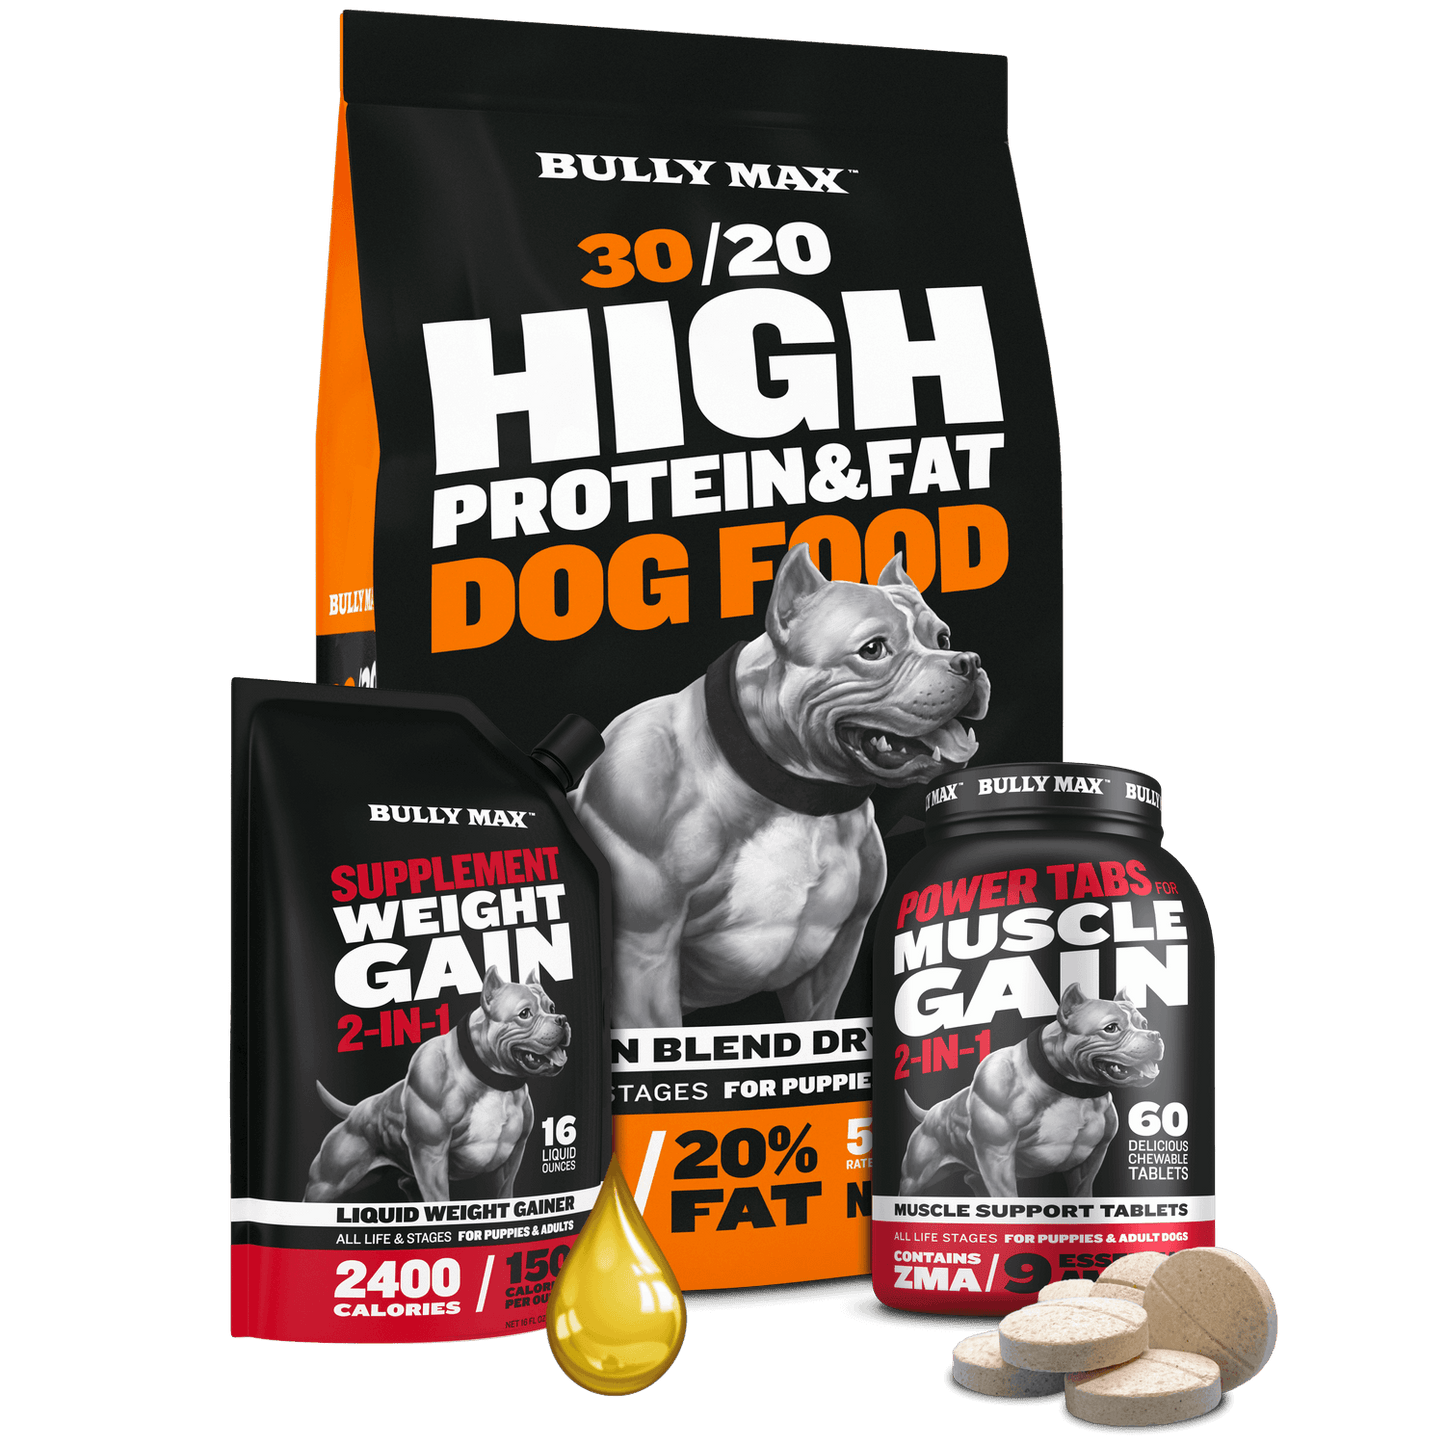 Bully Max Nutrition Plans